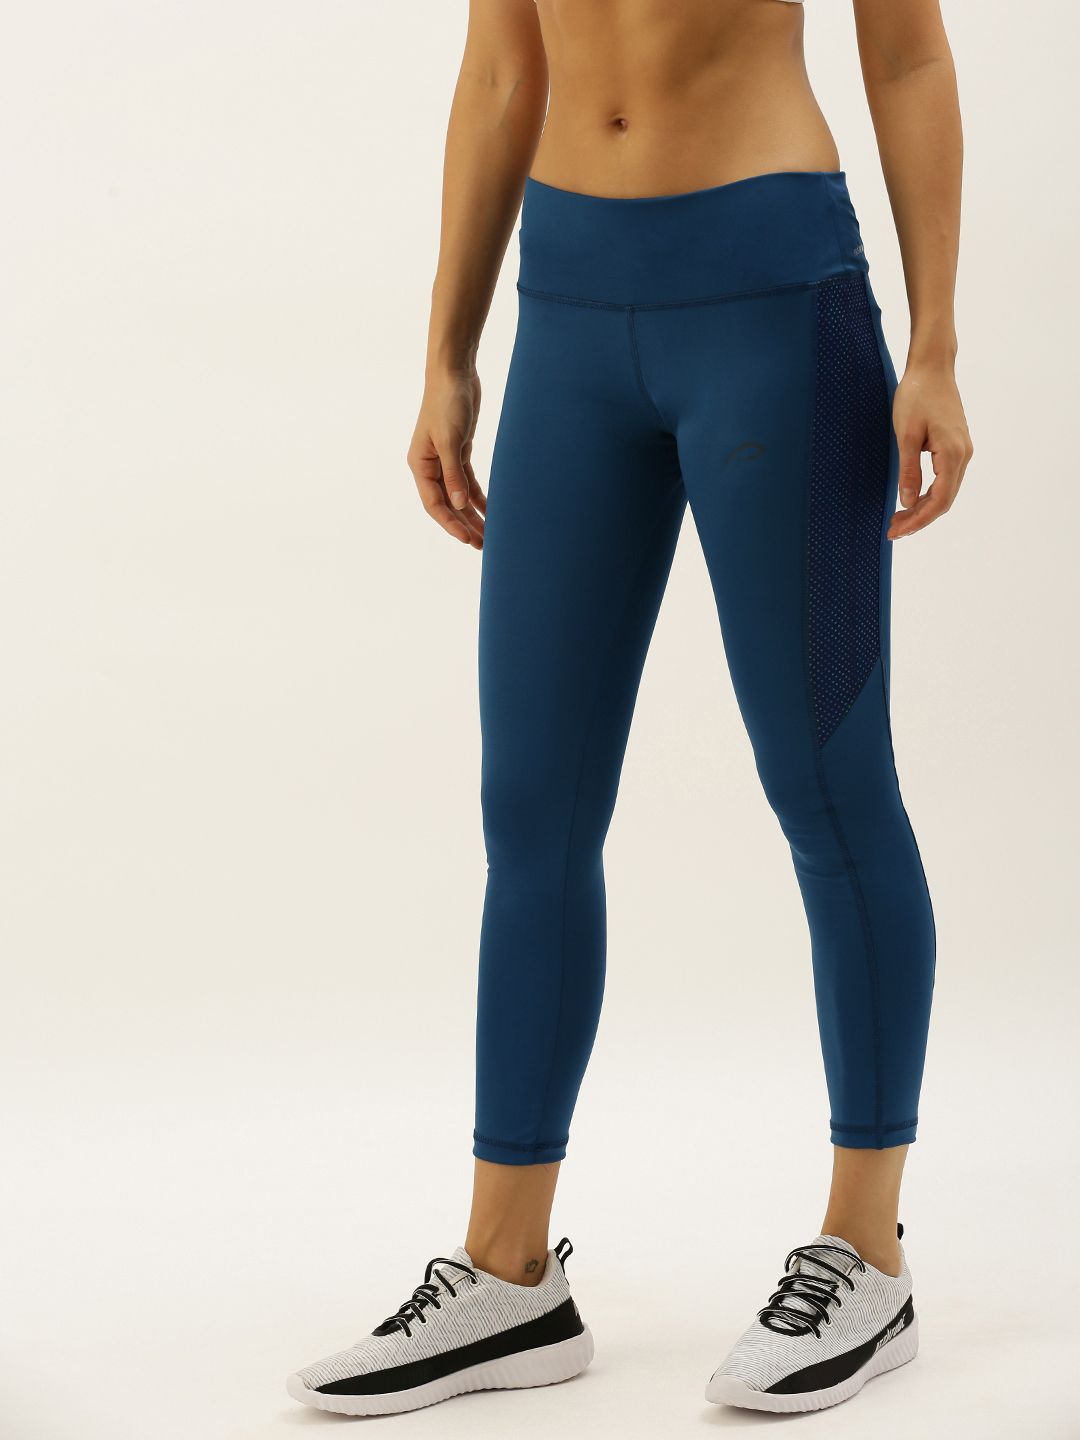 Proline Active Women Teal Blue Performance Fit Solid Cropped Tights with Printed Detail Price in India